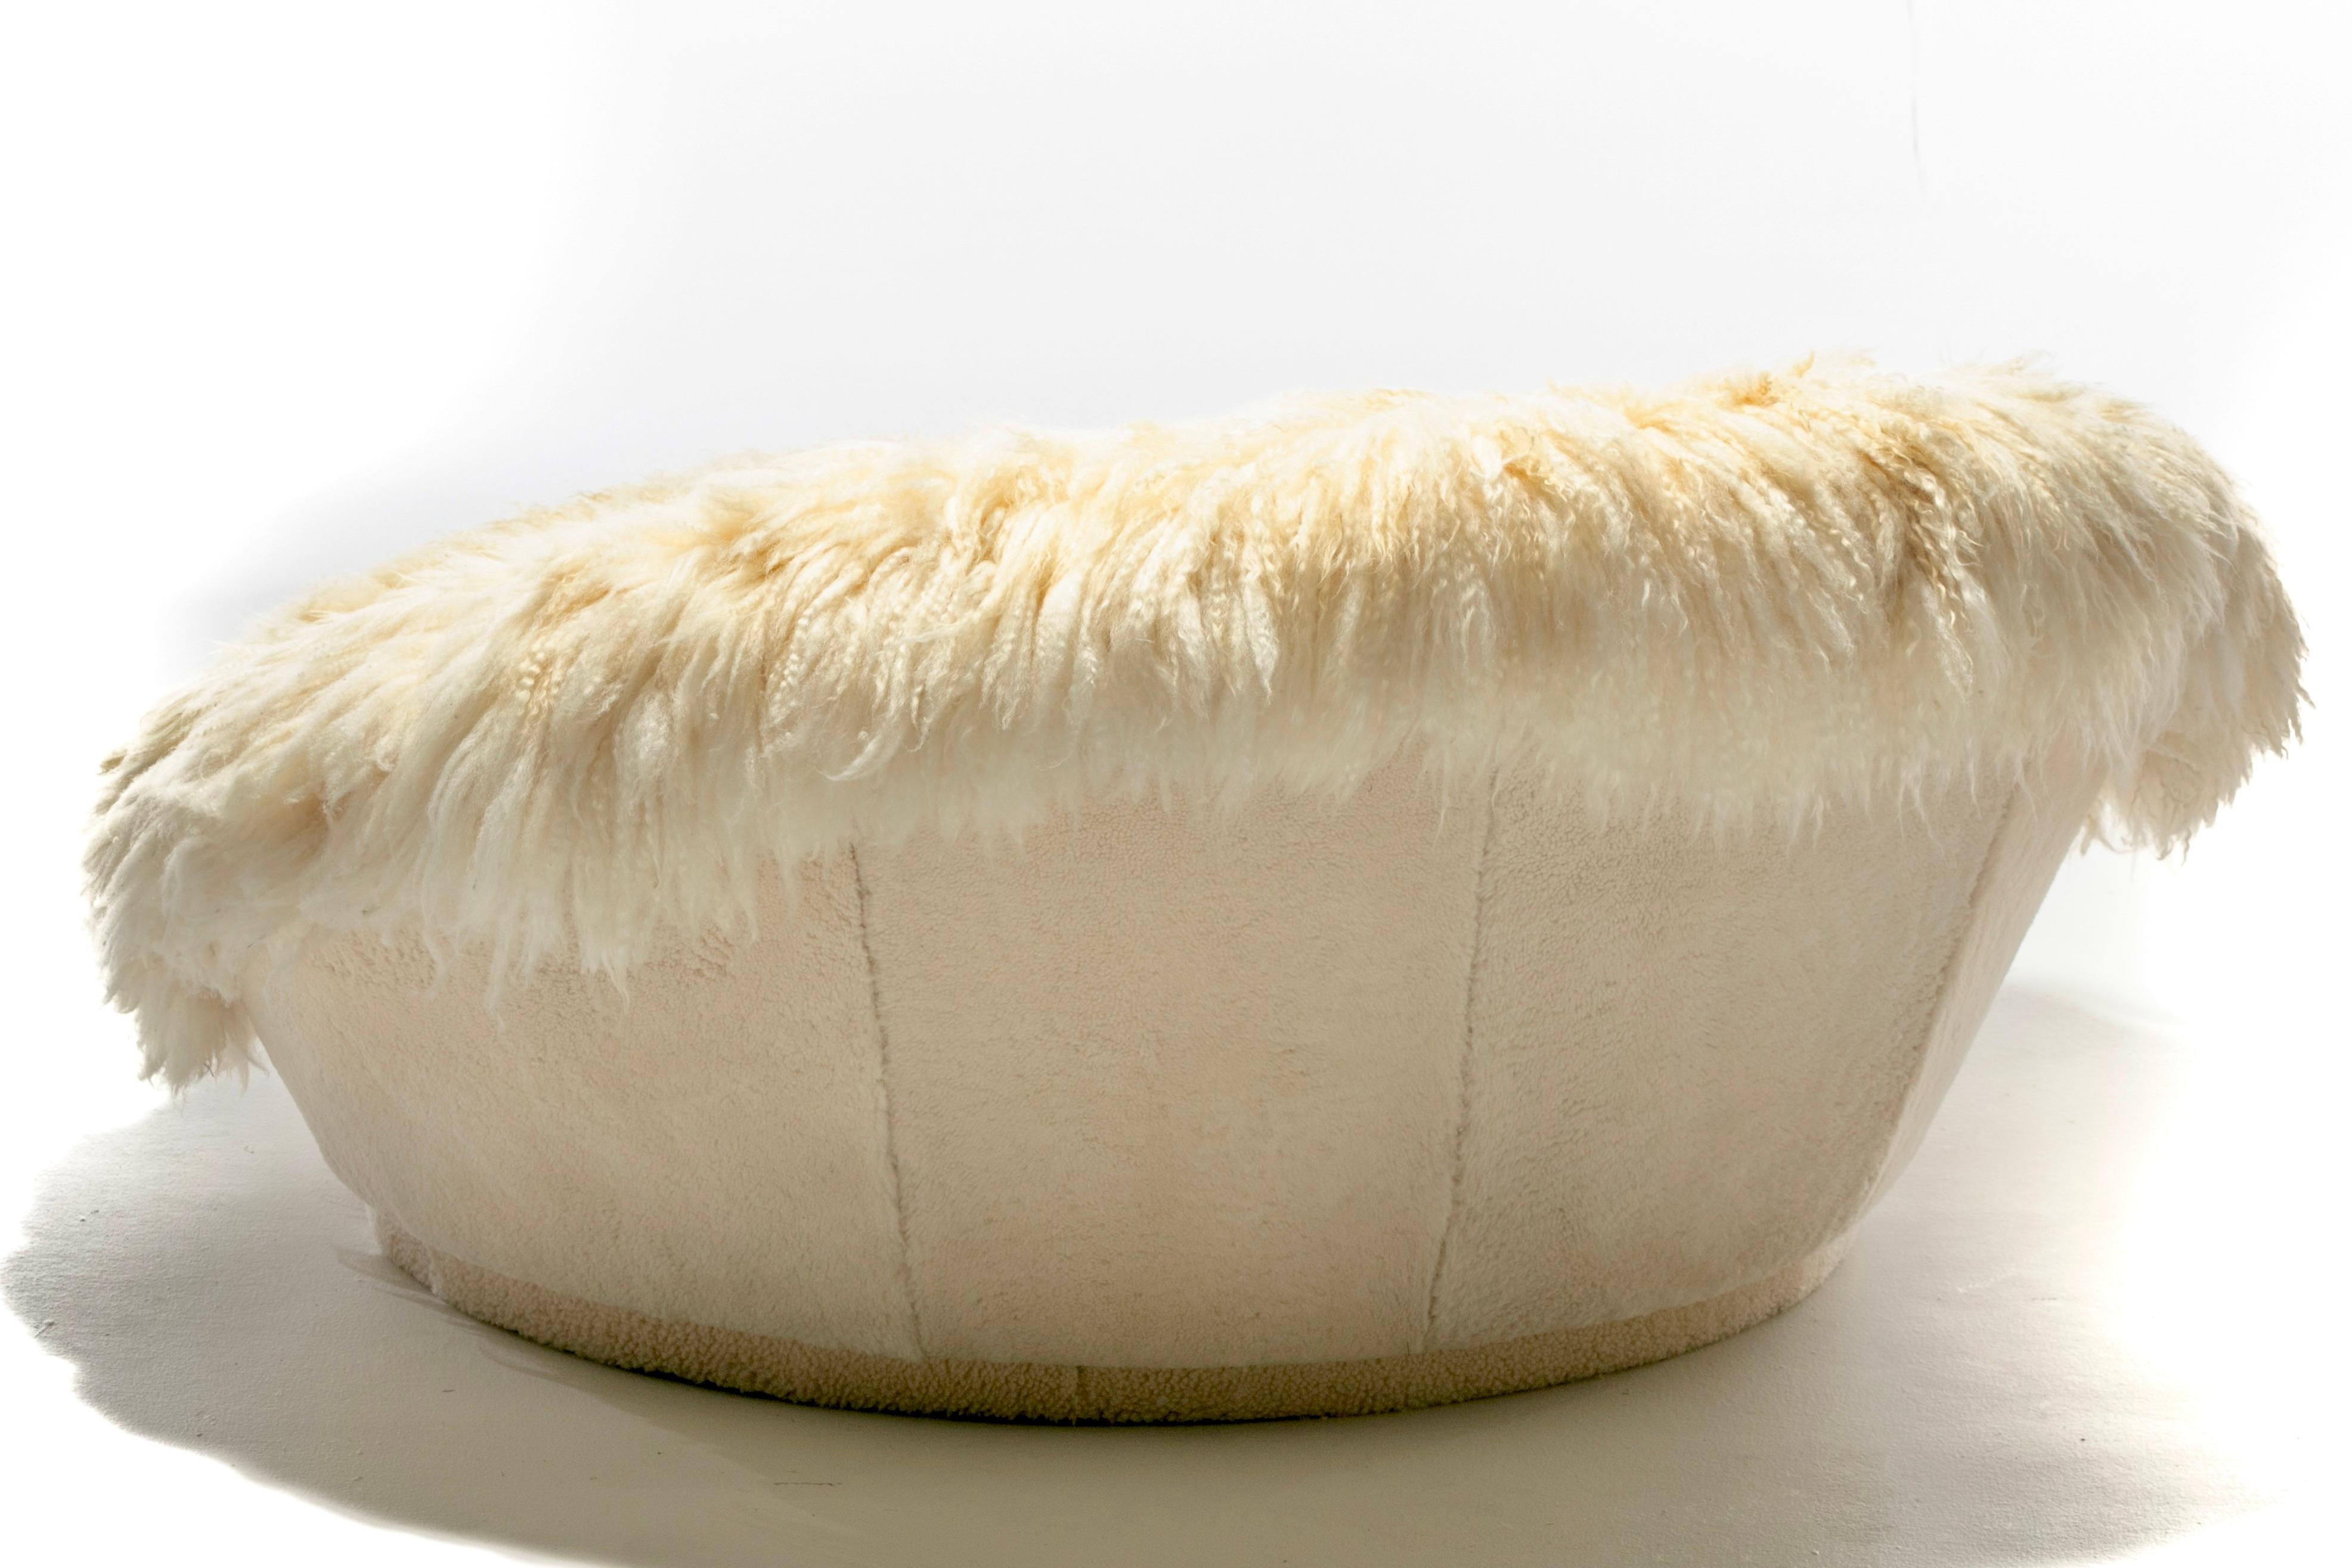 American Milo Baughman Style Satellite Lounge in Napa Valley Sheepskins & Ivory Shearling For Sale